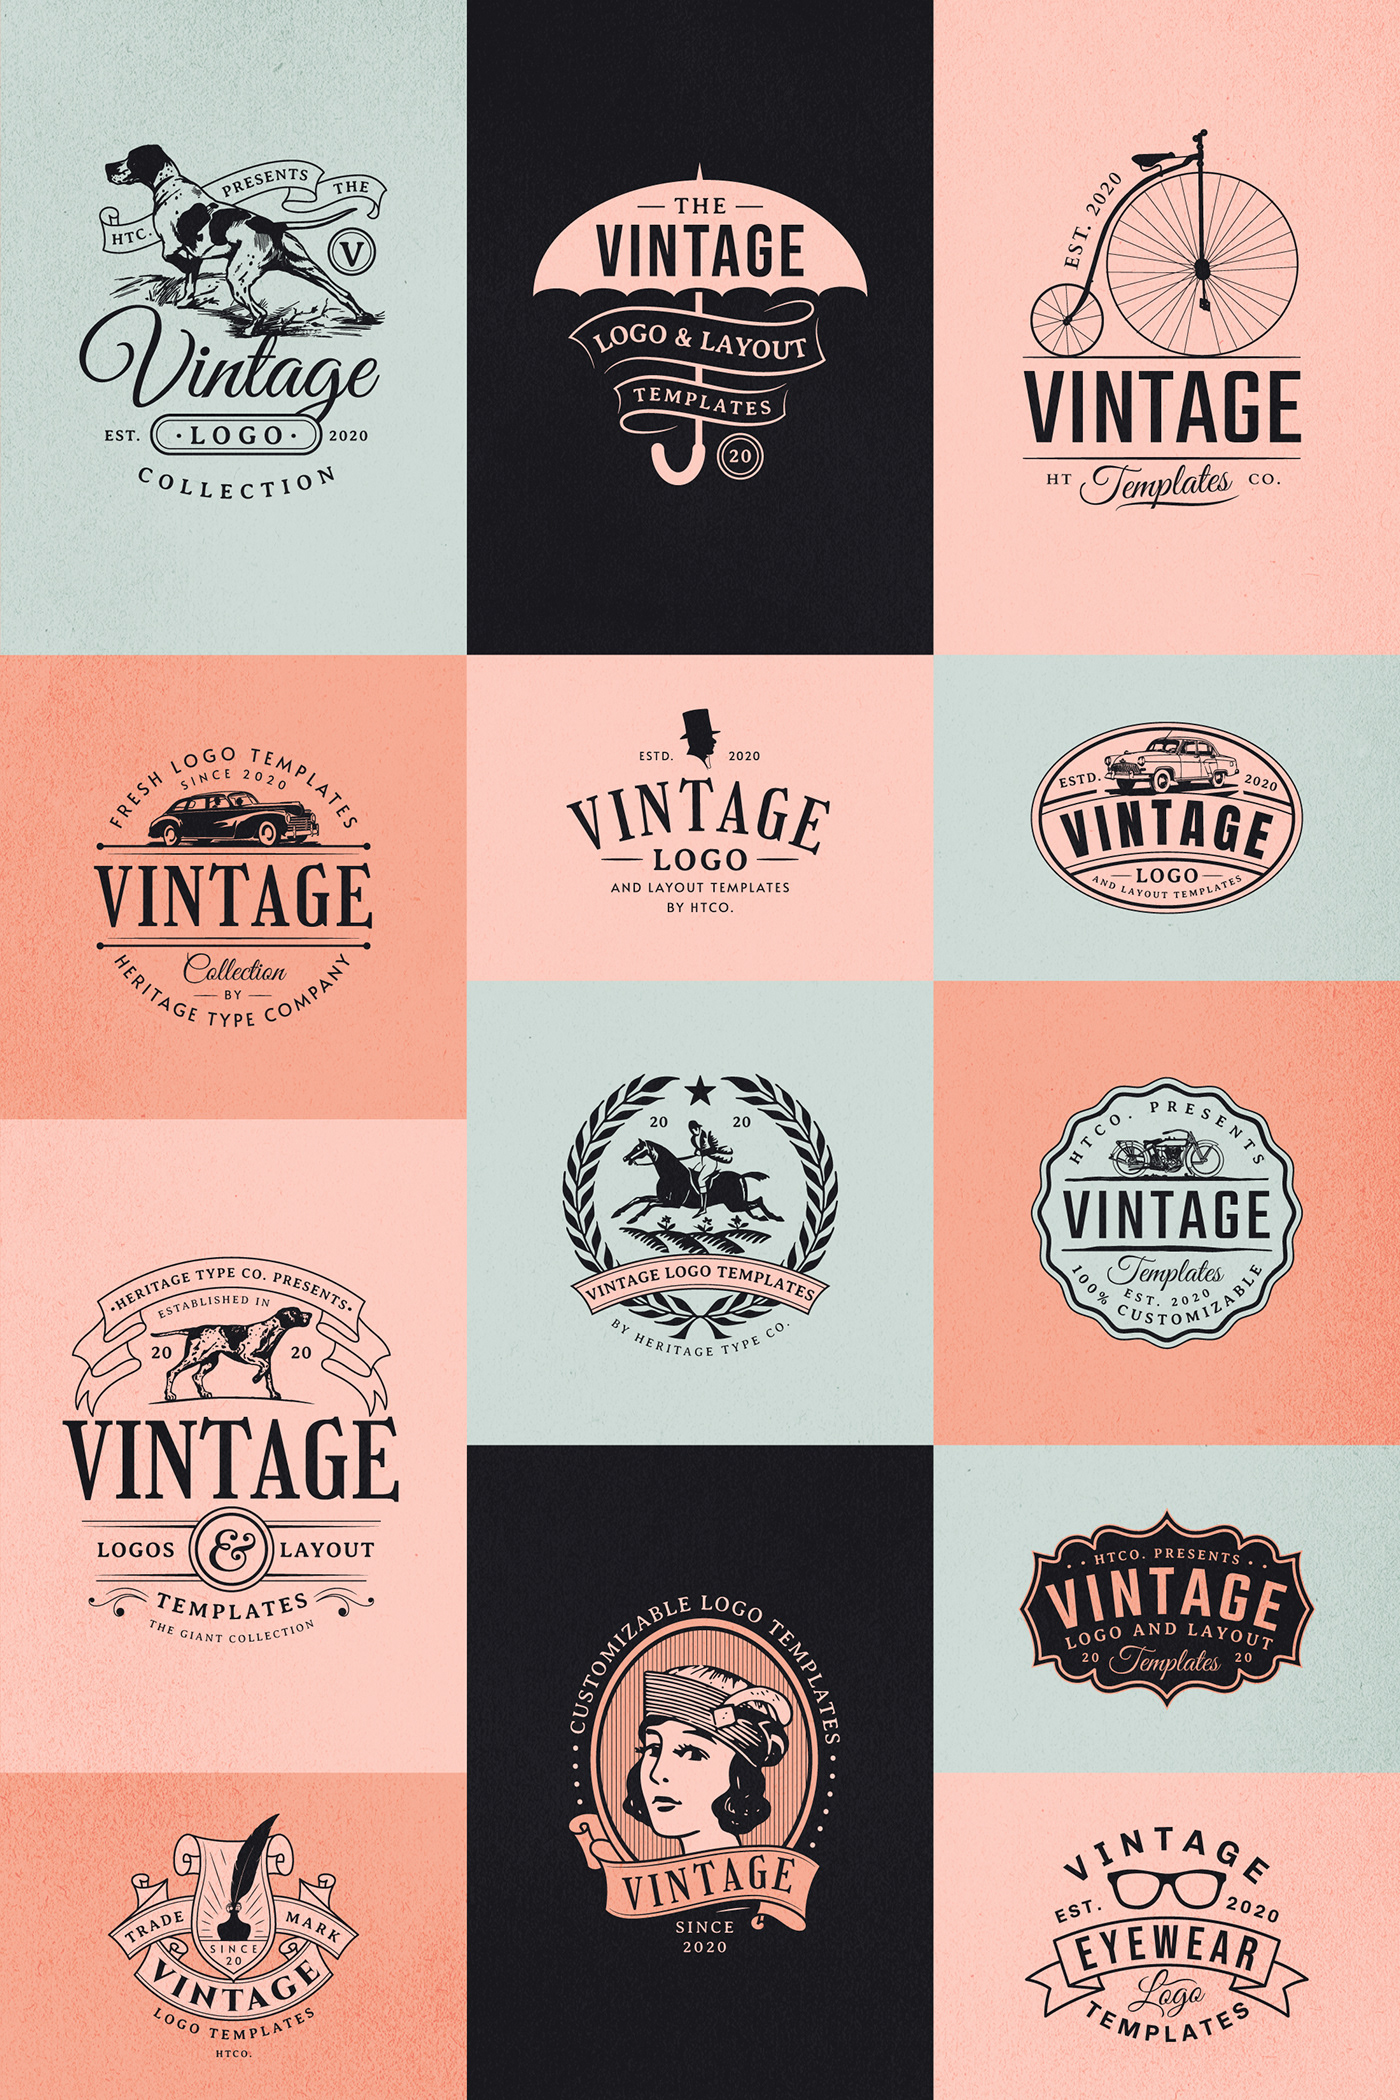 A collection of vintage logo templates